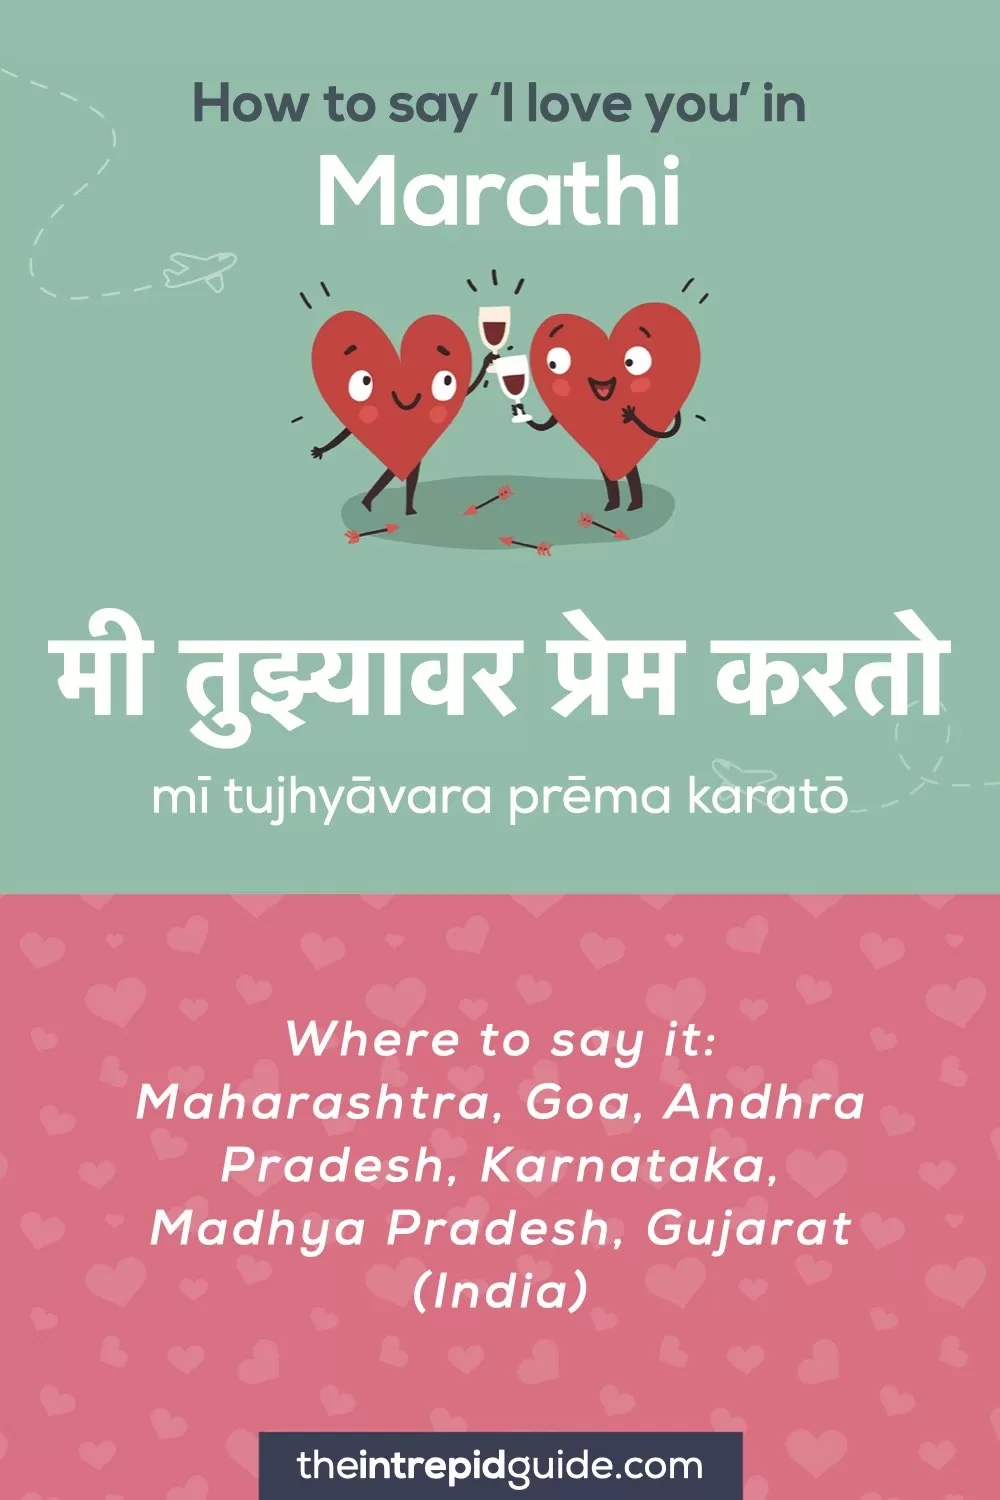 How to say I love you in different languages - Marathi - मी तुझ्यावर प्रेम करतो